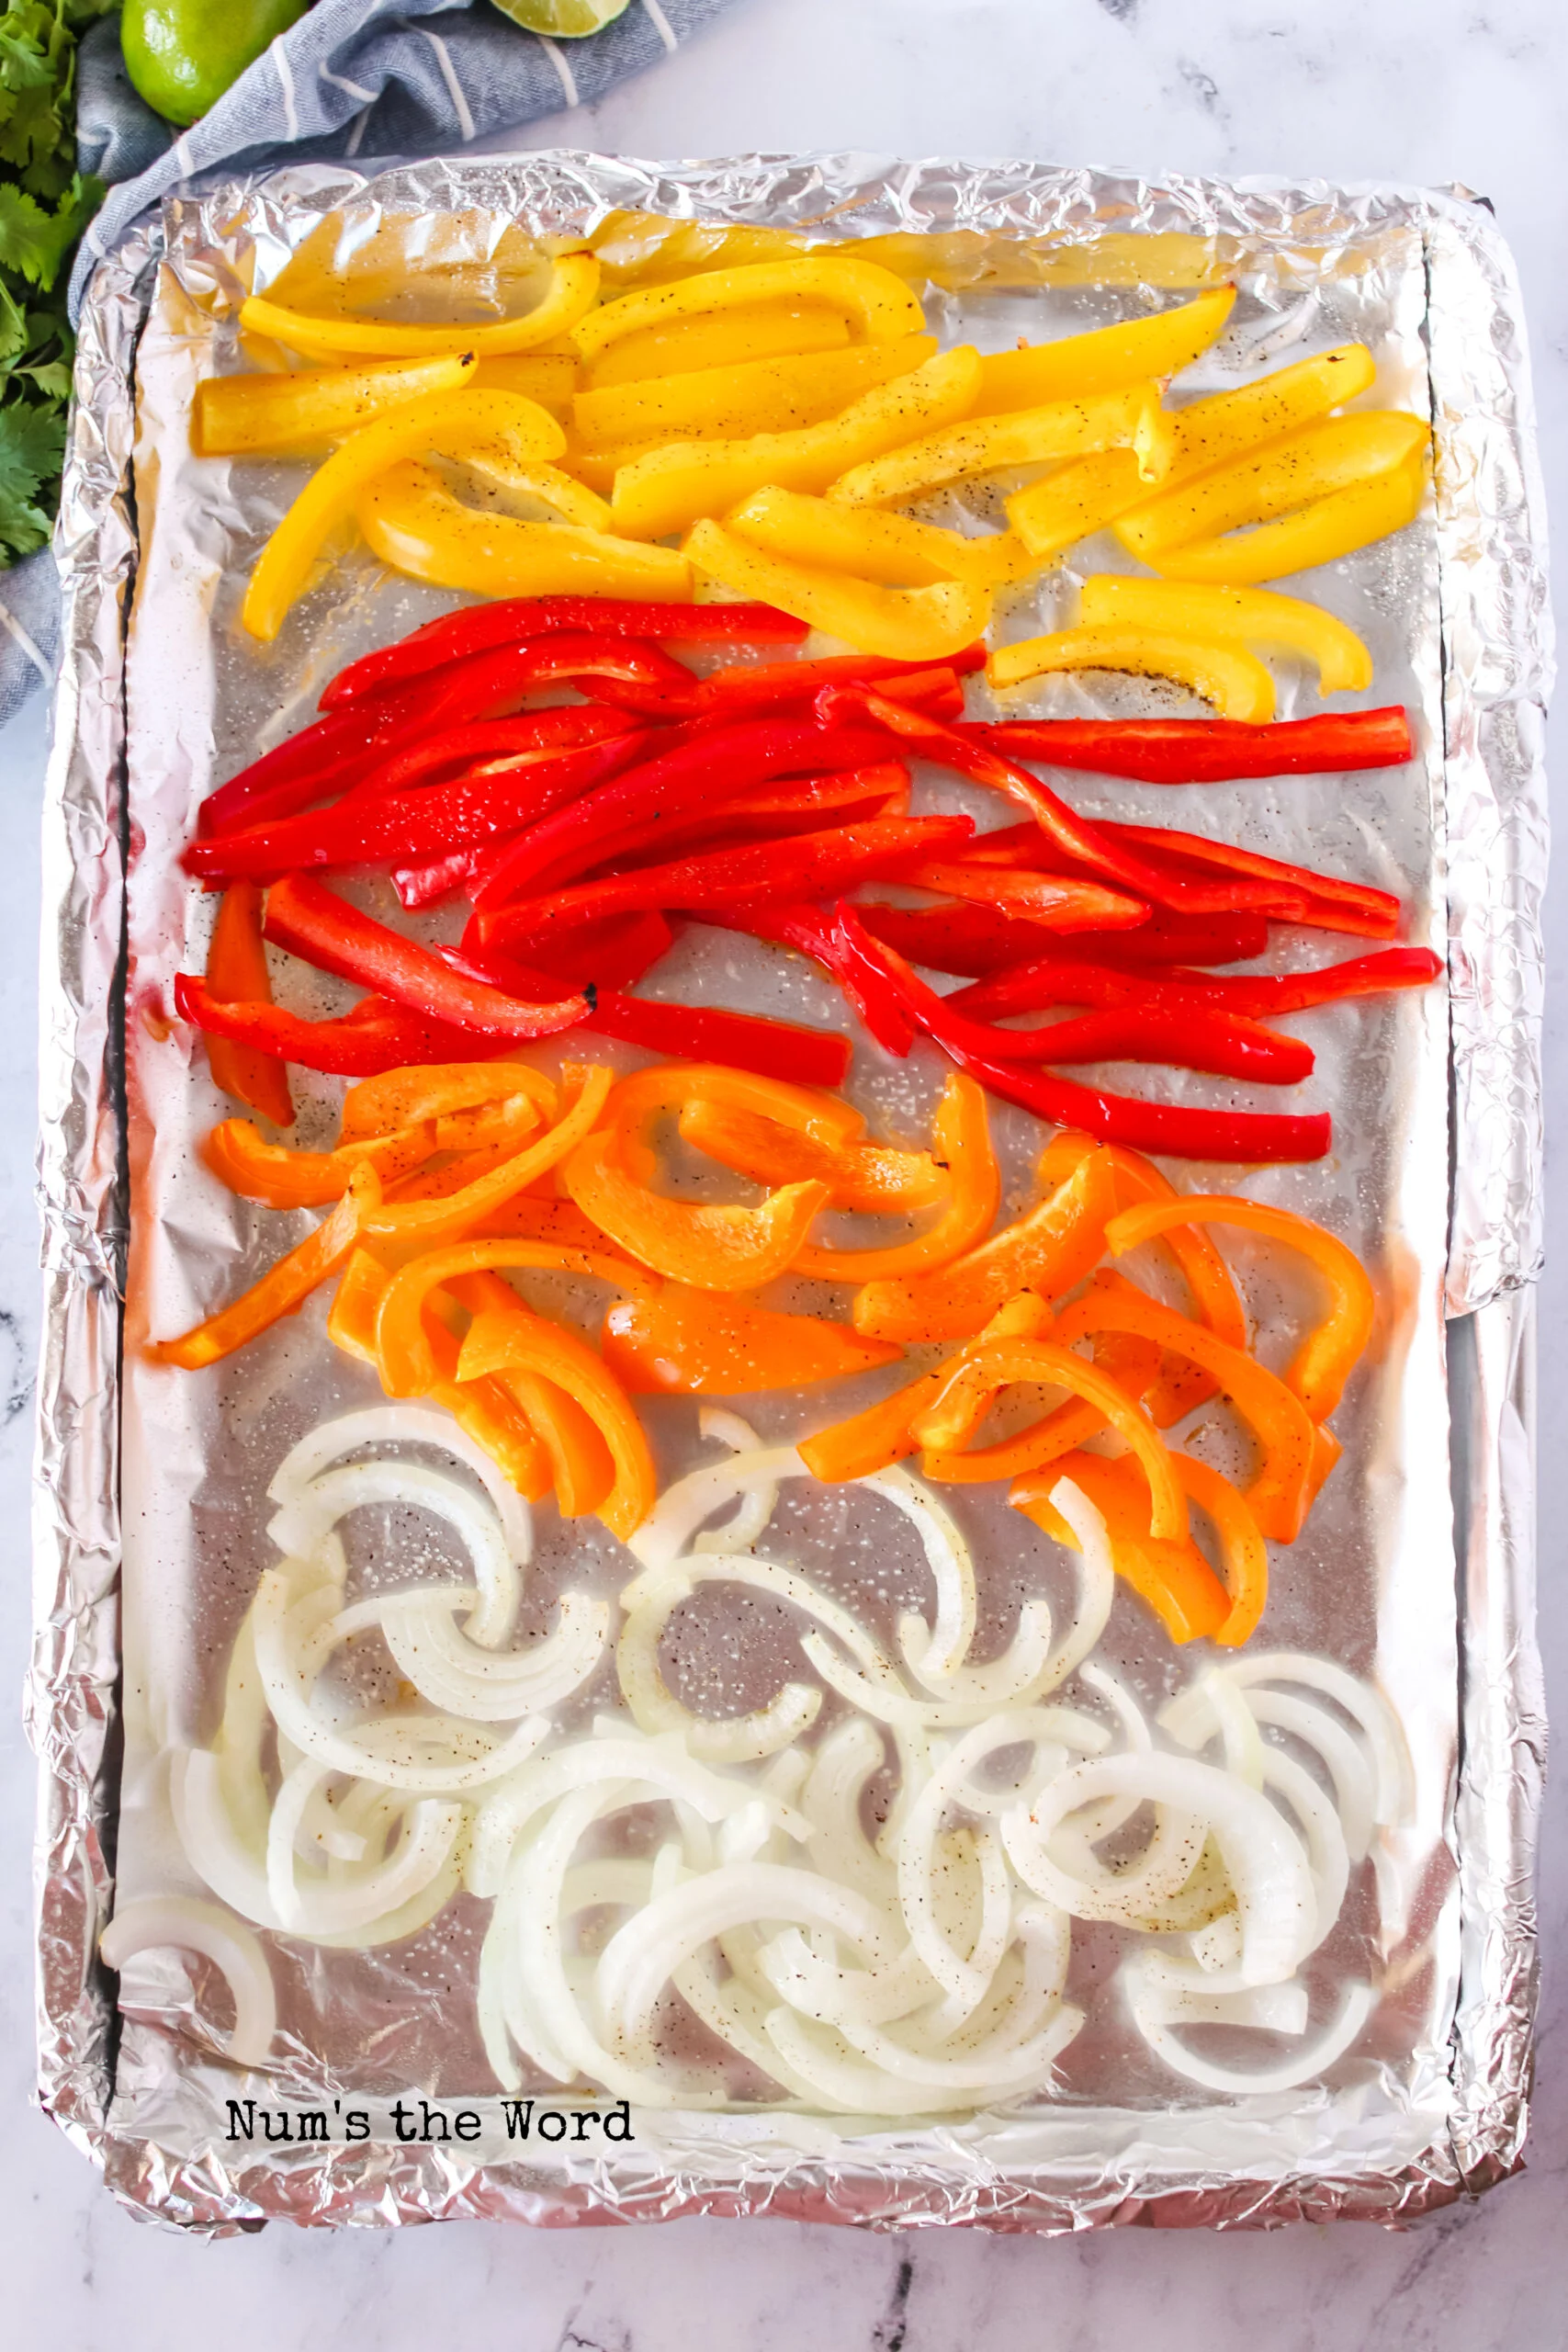 onions and peppers on a sheet pan, spread out.